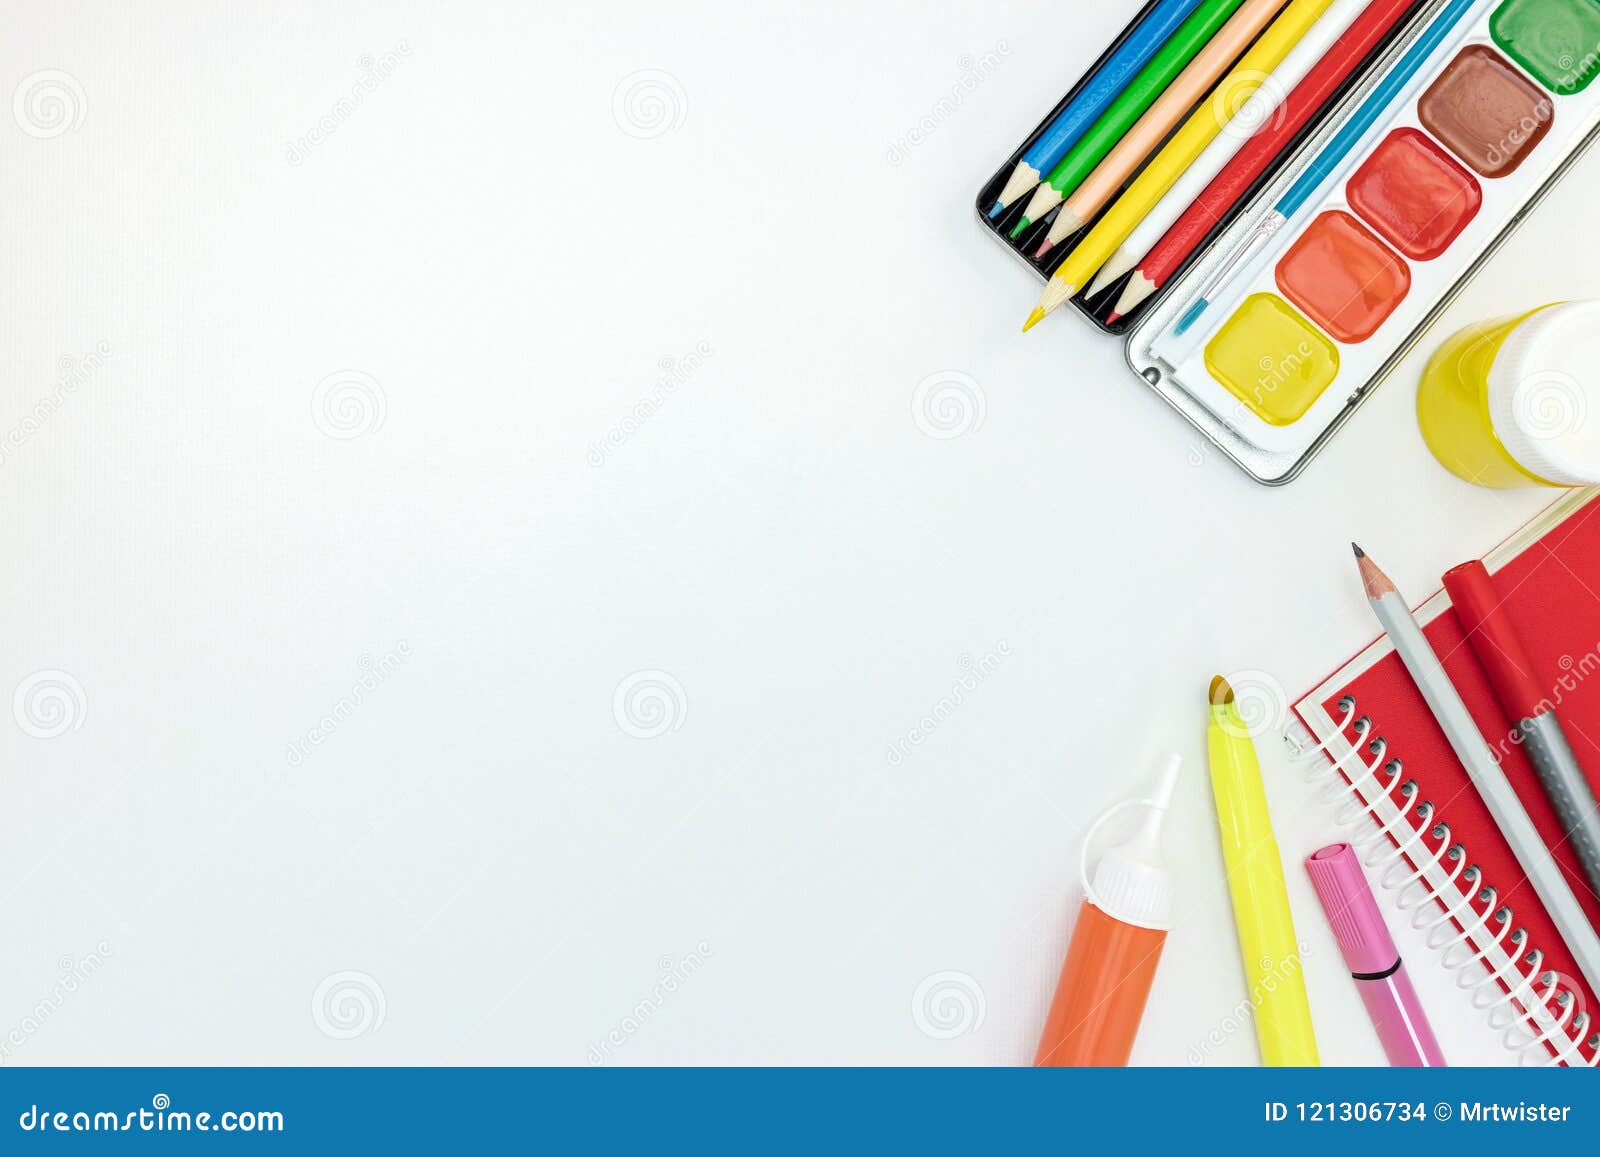 Painting Tools For School On White Desk Background Stock Photo